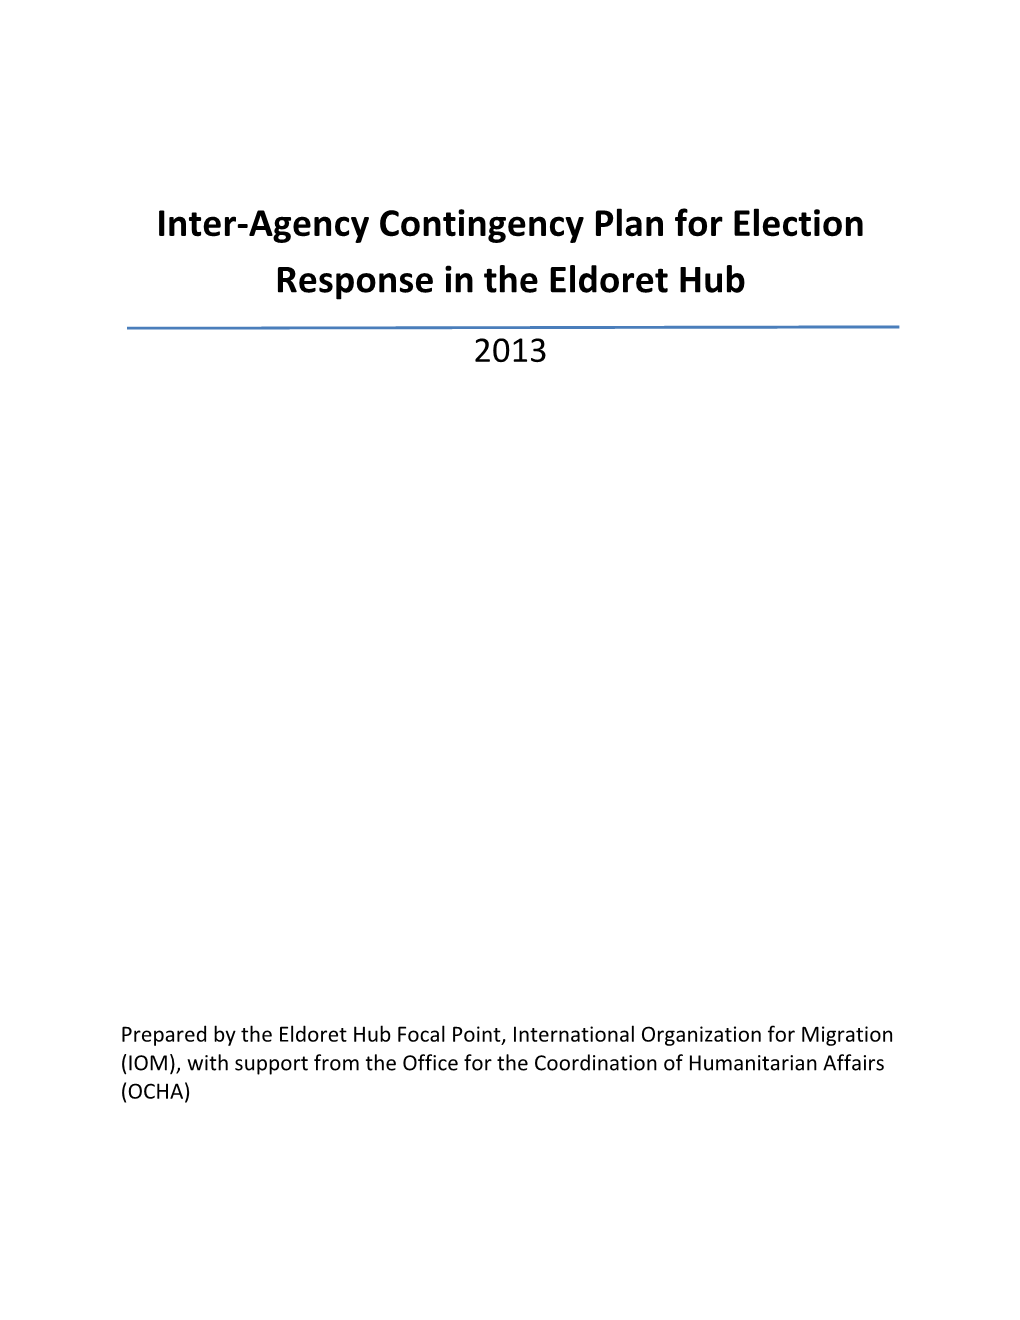 Inter-Agency Contingency Plan for Election Response in the Eldoret Hub 2013